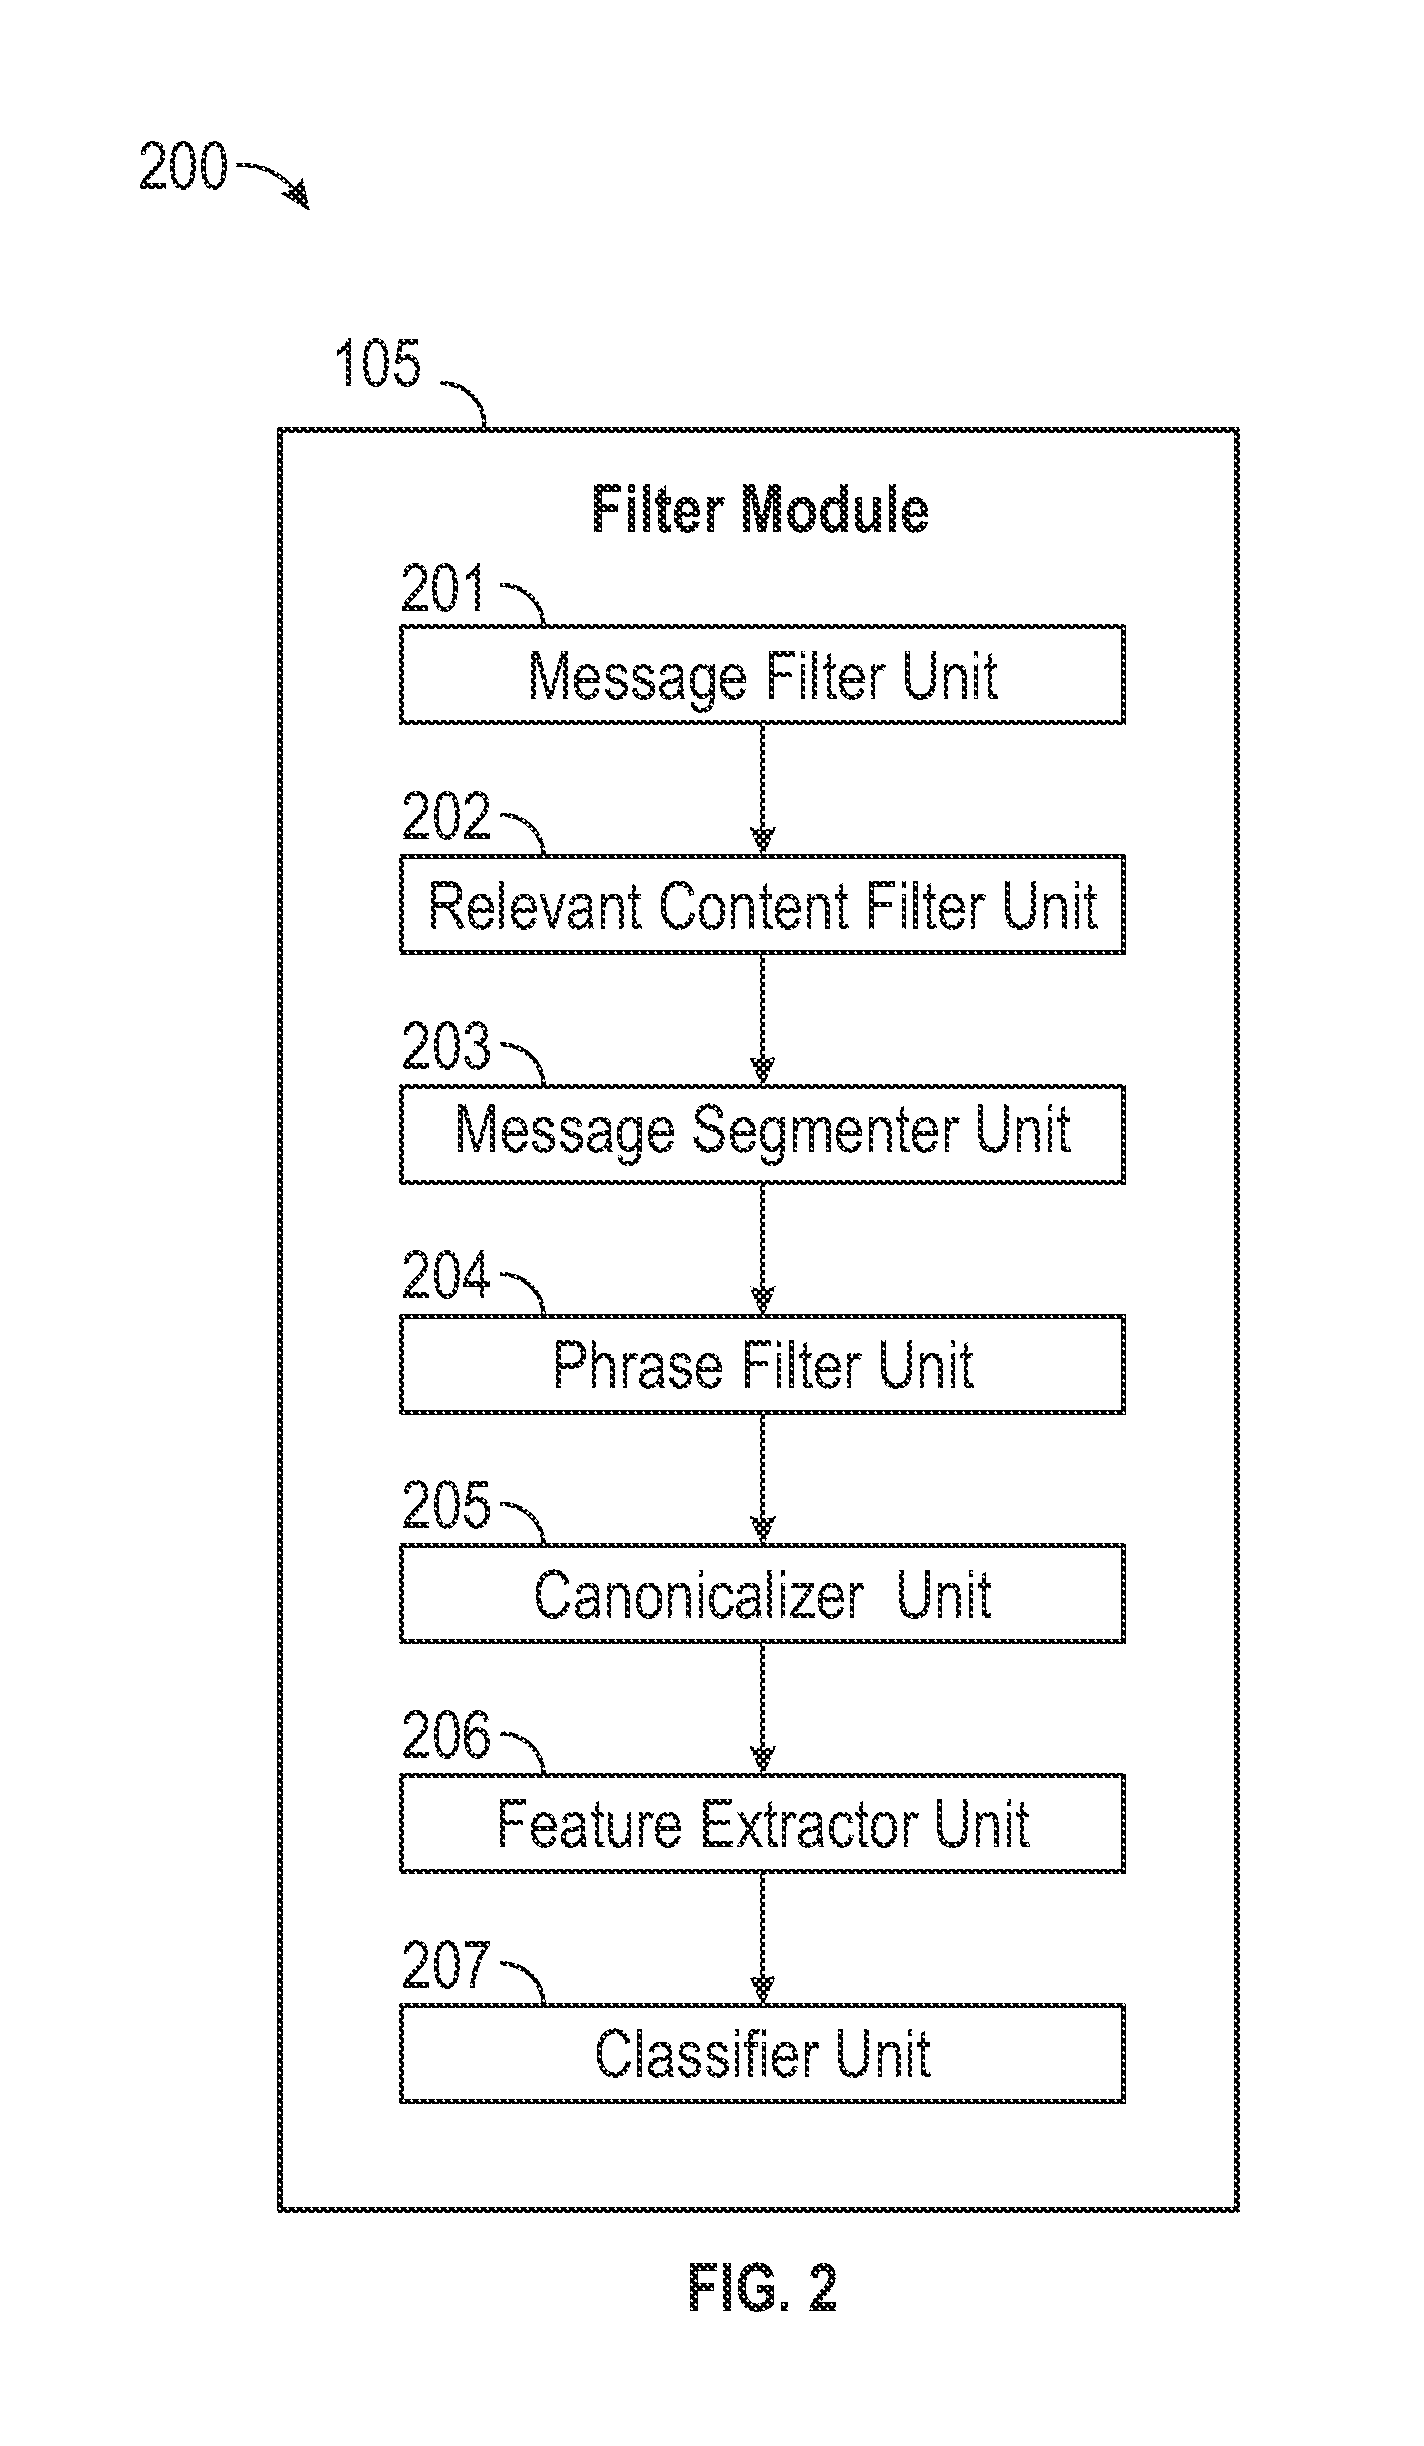 System and method for automatically mining corpus of communications and identifying messages or phrases that require the recipient's attention, response, or action